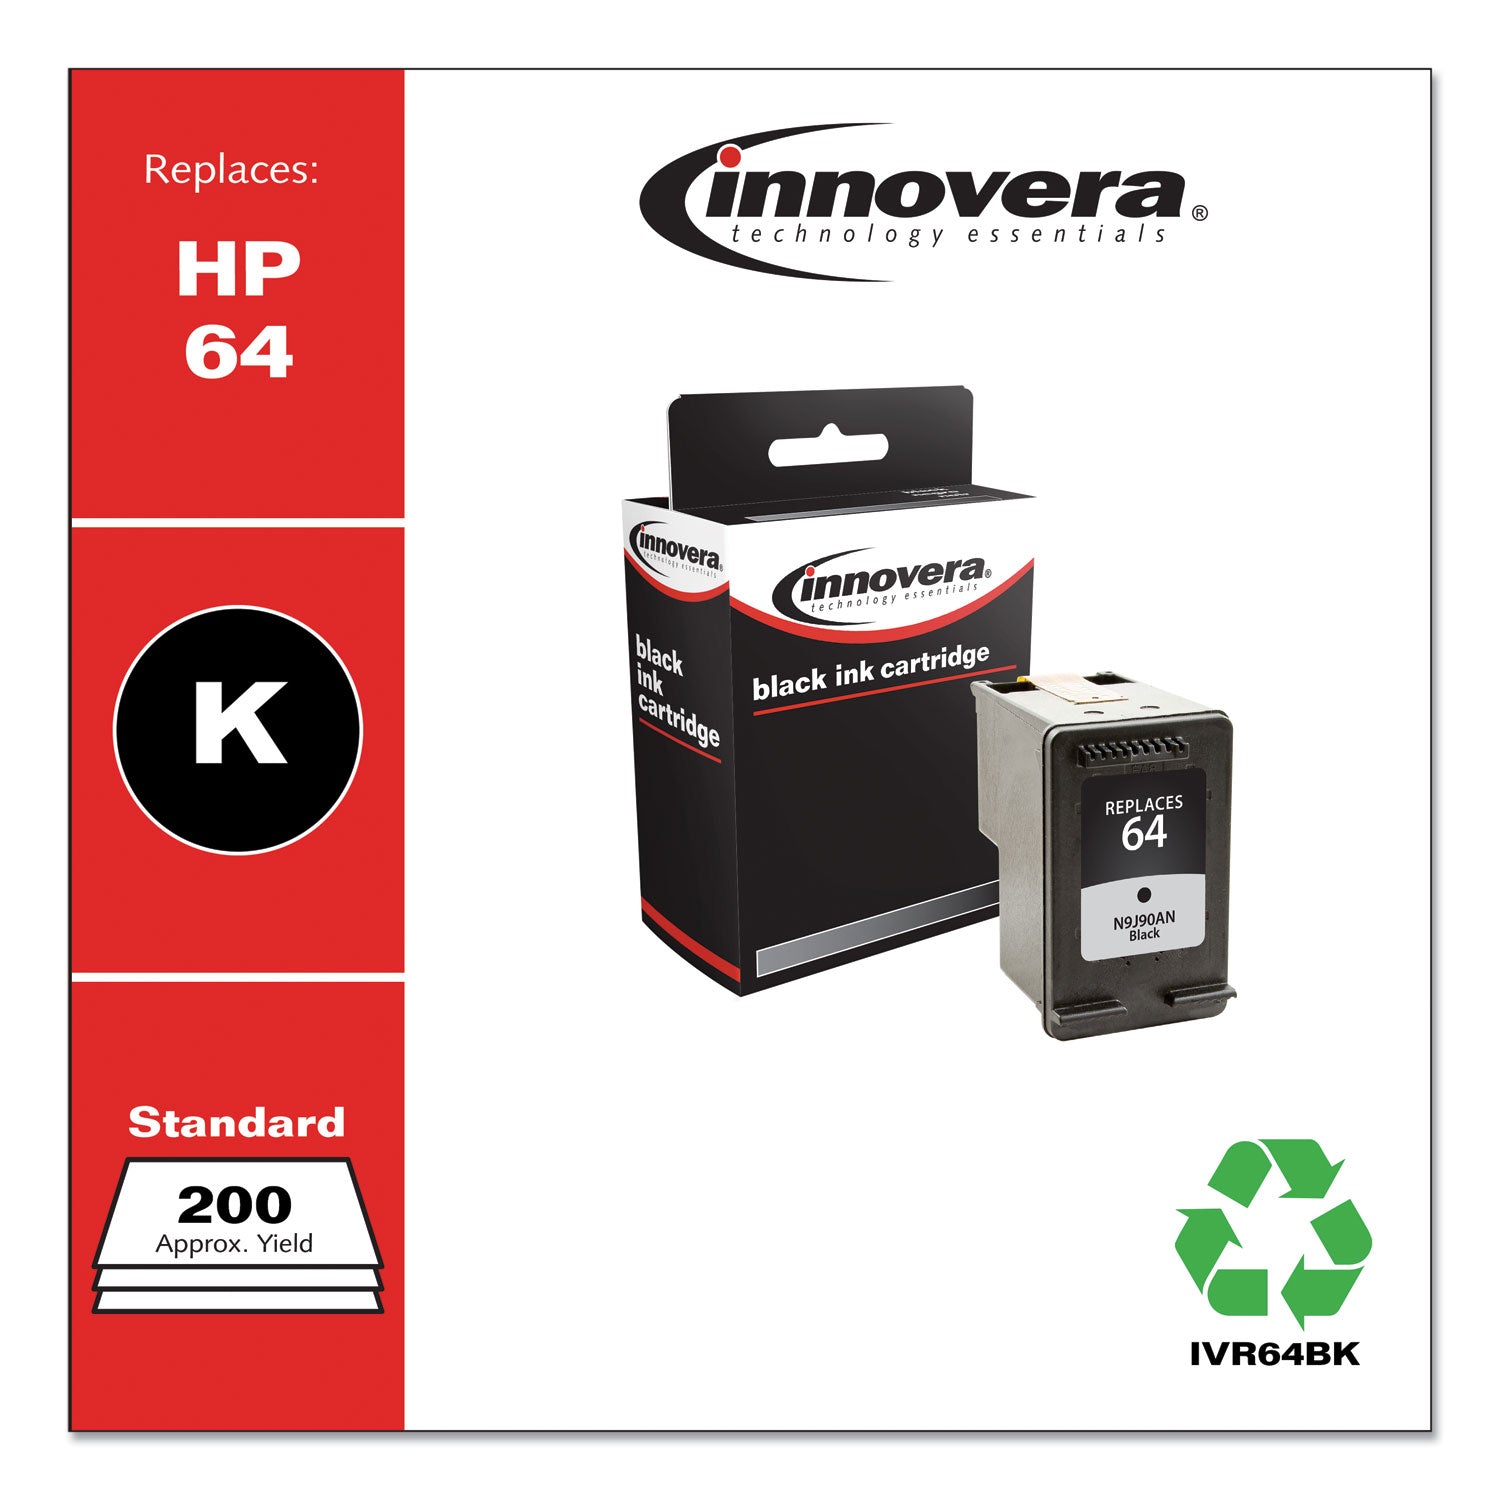 remanufactured-black-ink-replacement-for-64-n9j90an-200-page-yield_ivr64bk - 2